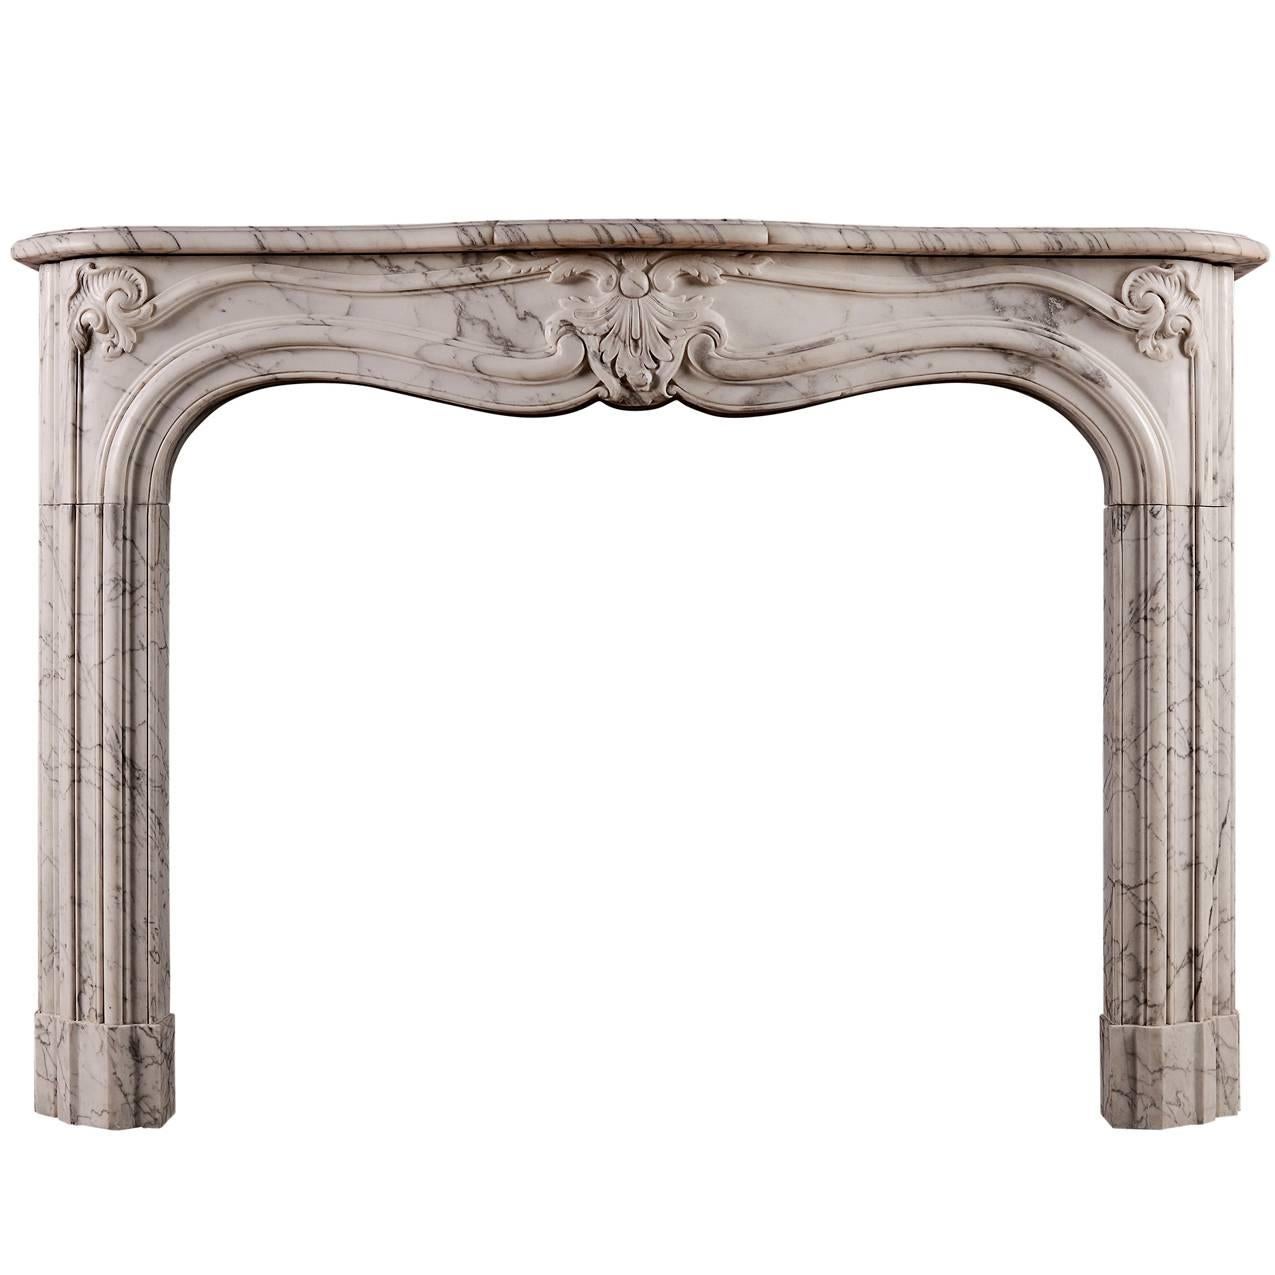 French Marble Fireplace Mantel in the Rococo Manner